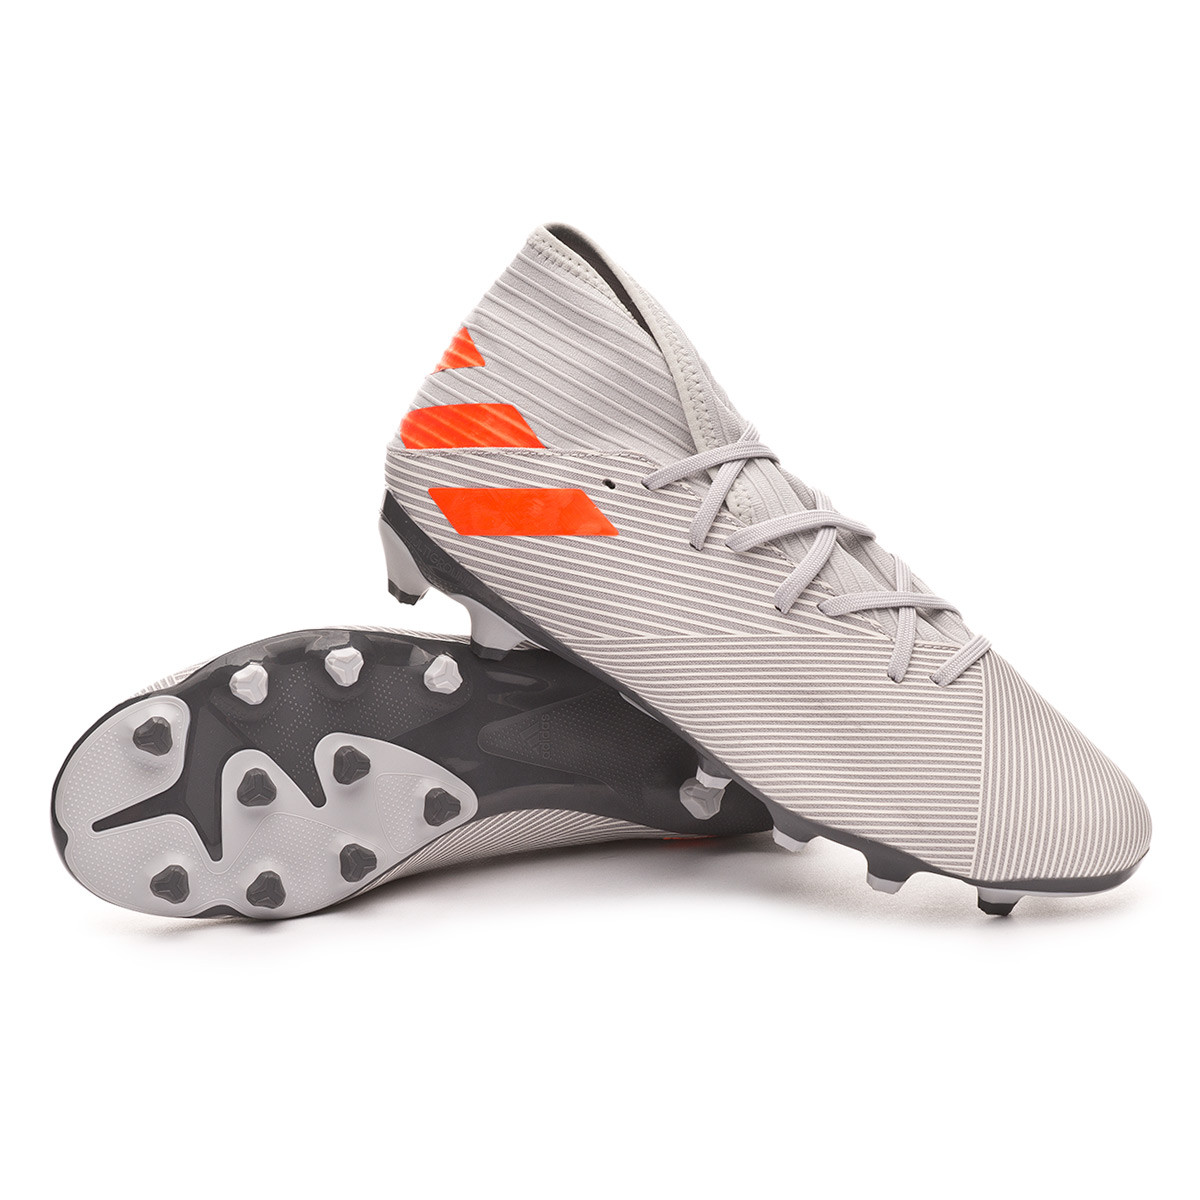 orange and white football boots